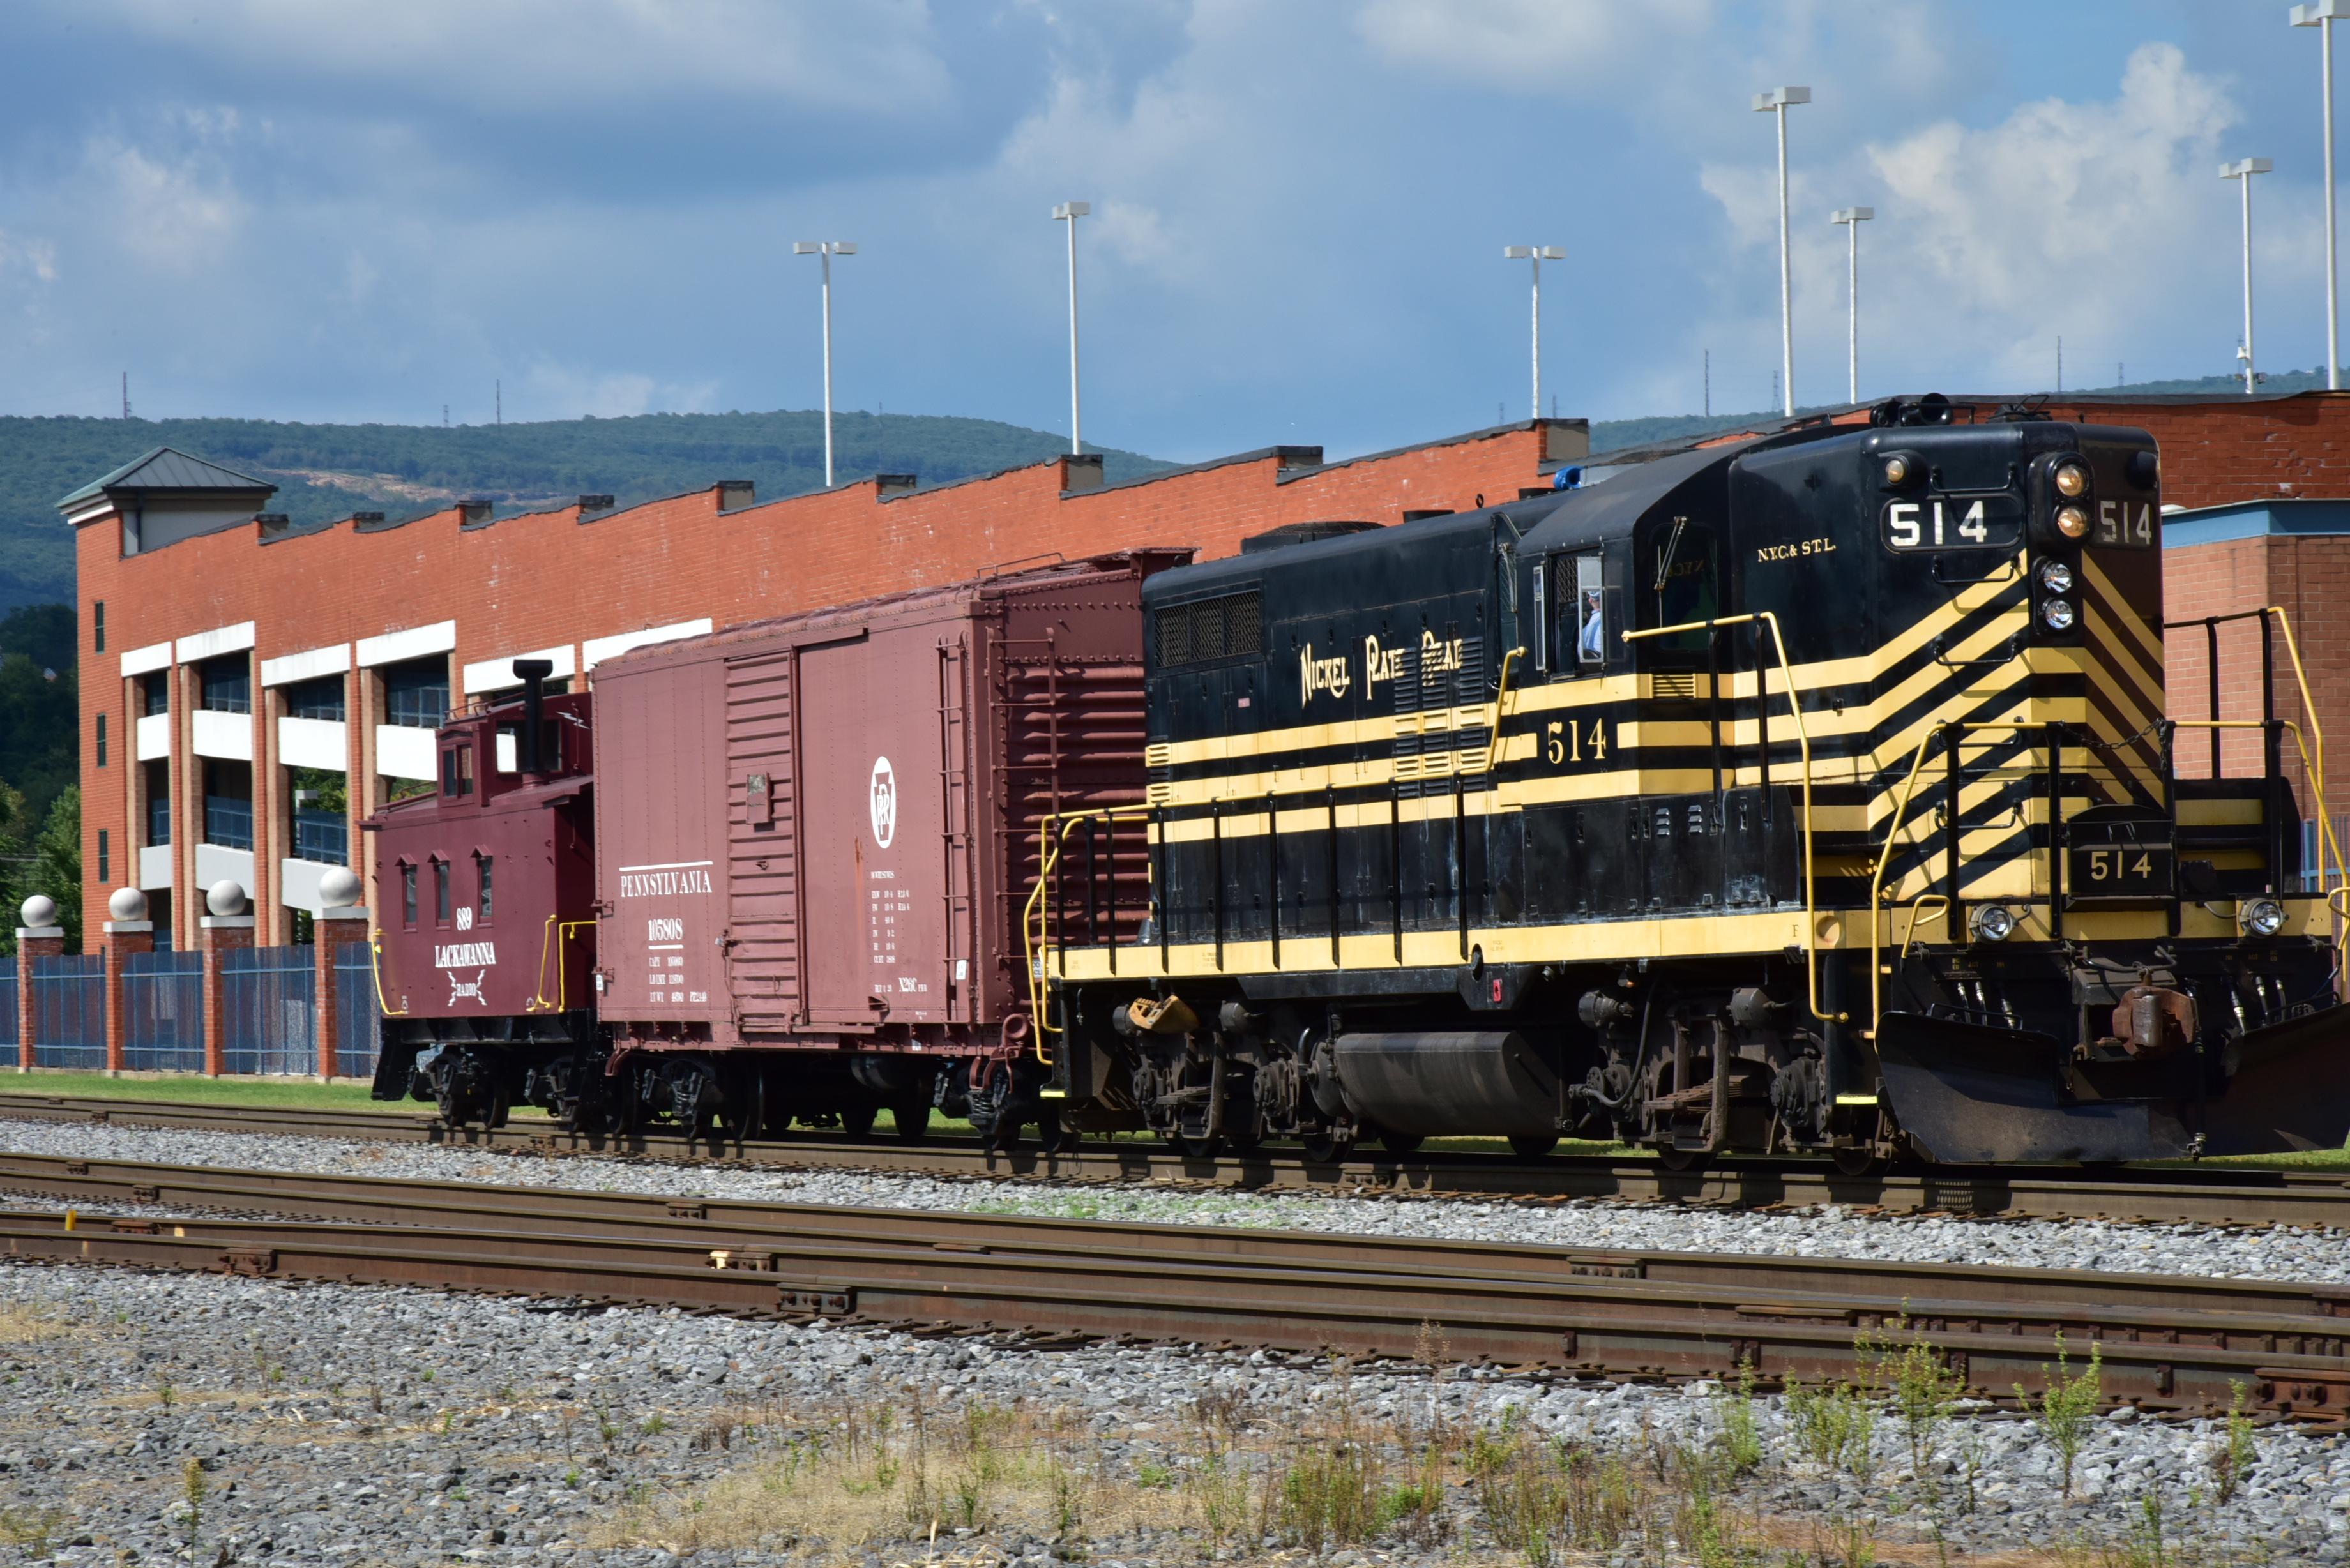 Black and yellow diesel engine 514 pulling a faded red box car and a dark red caboose